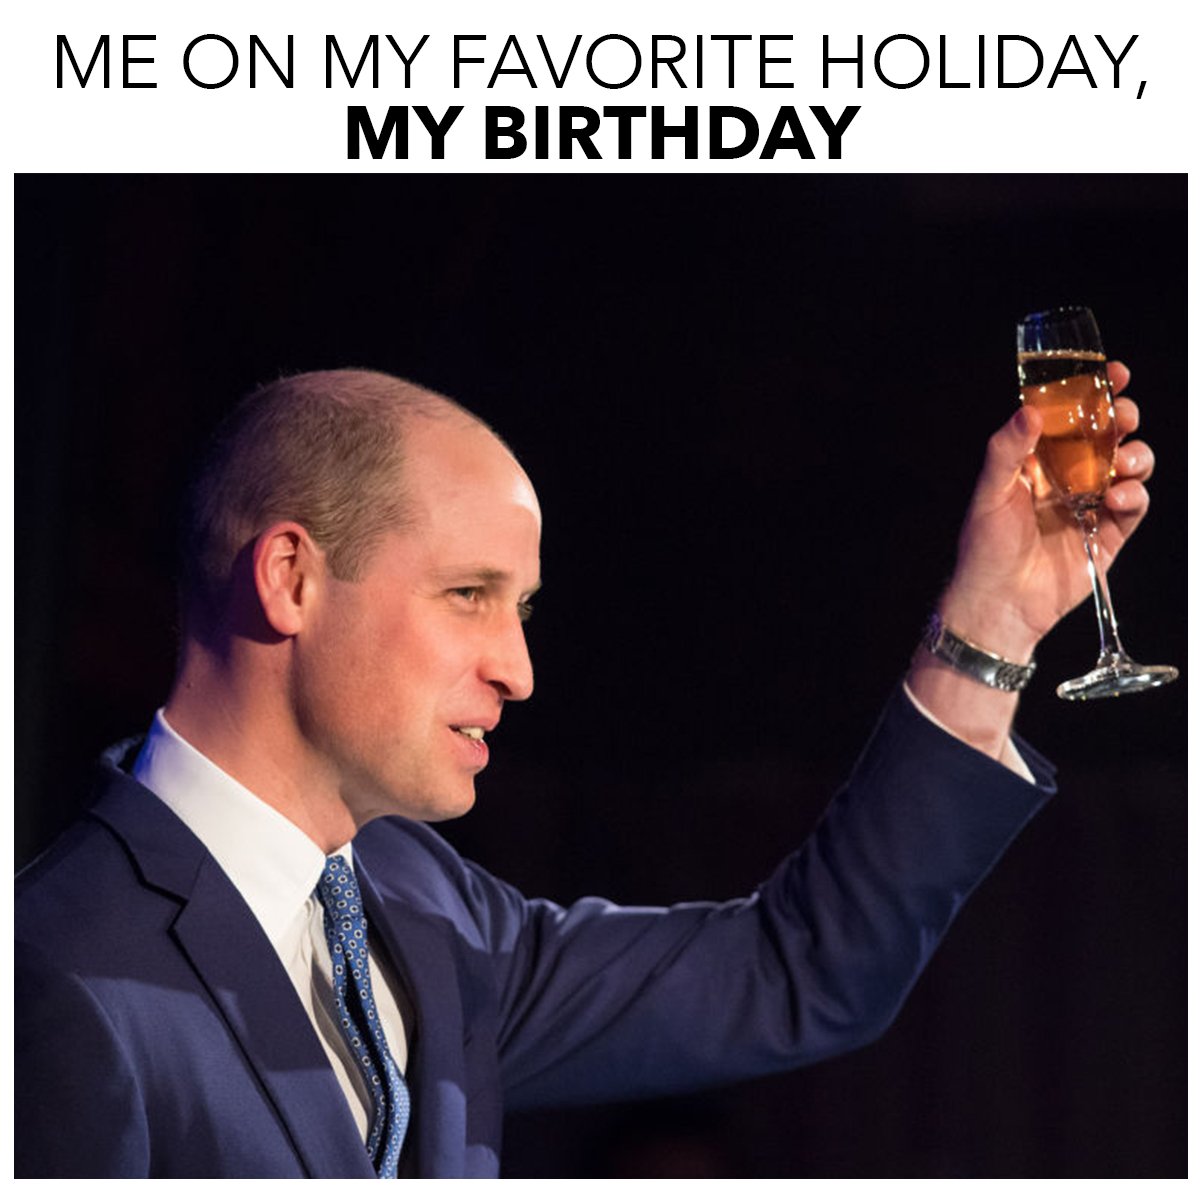 Today, we celebrate one of our favorite royals.   Happy birthday, Prince William!  Cheers to another great year. 